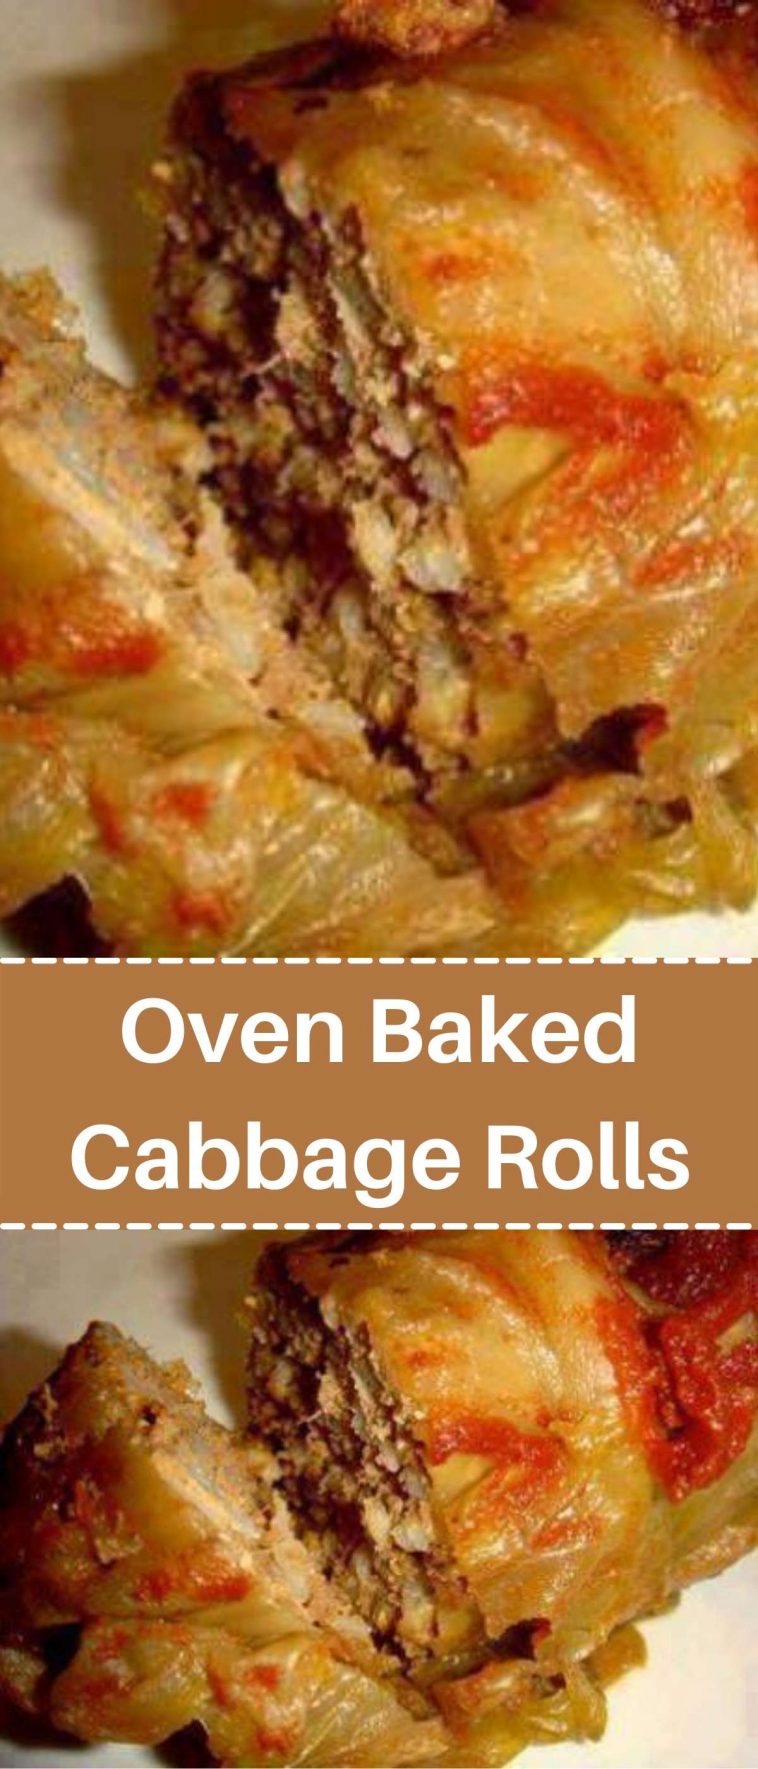 Oven Baked Cabbage Rolls